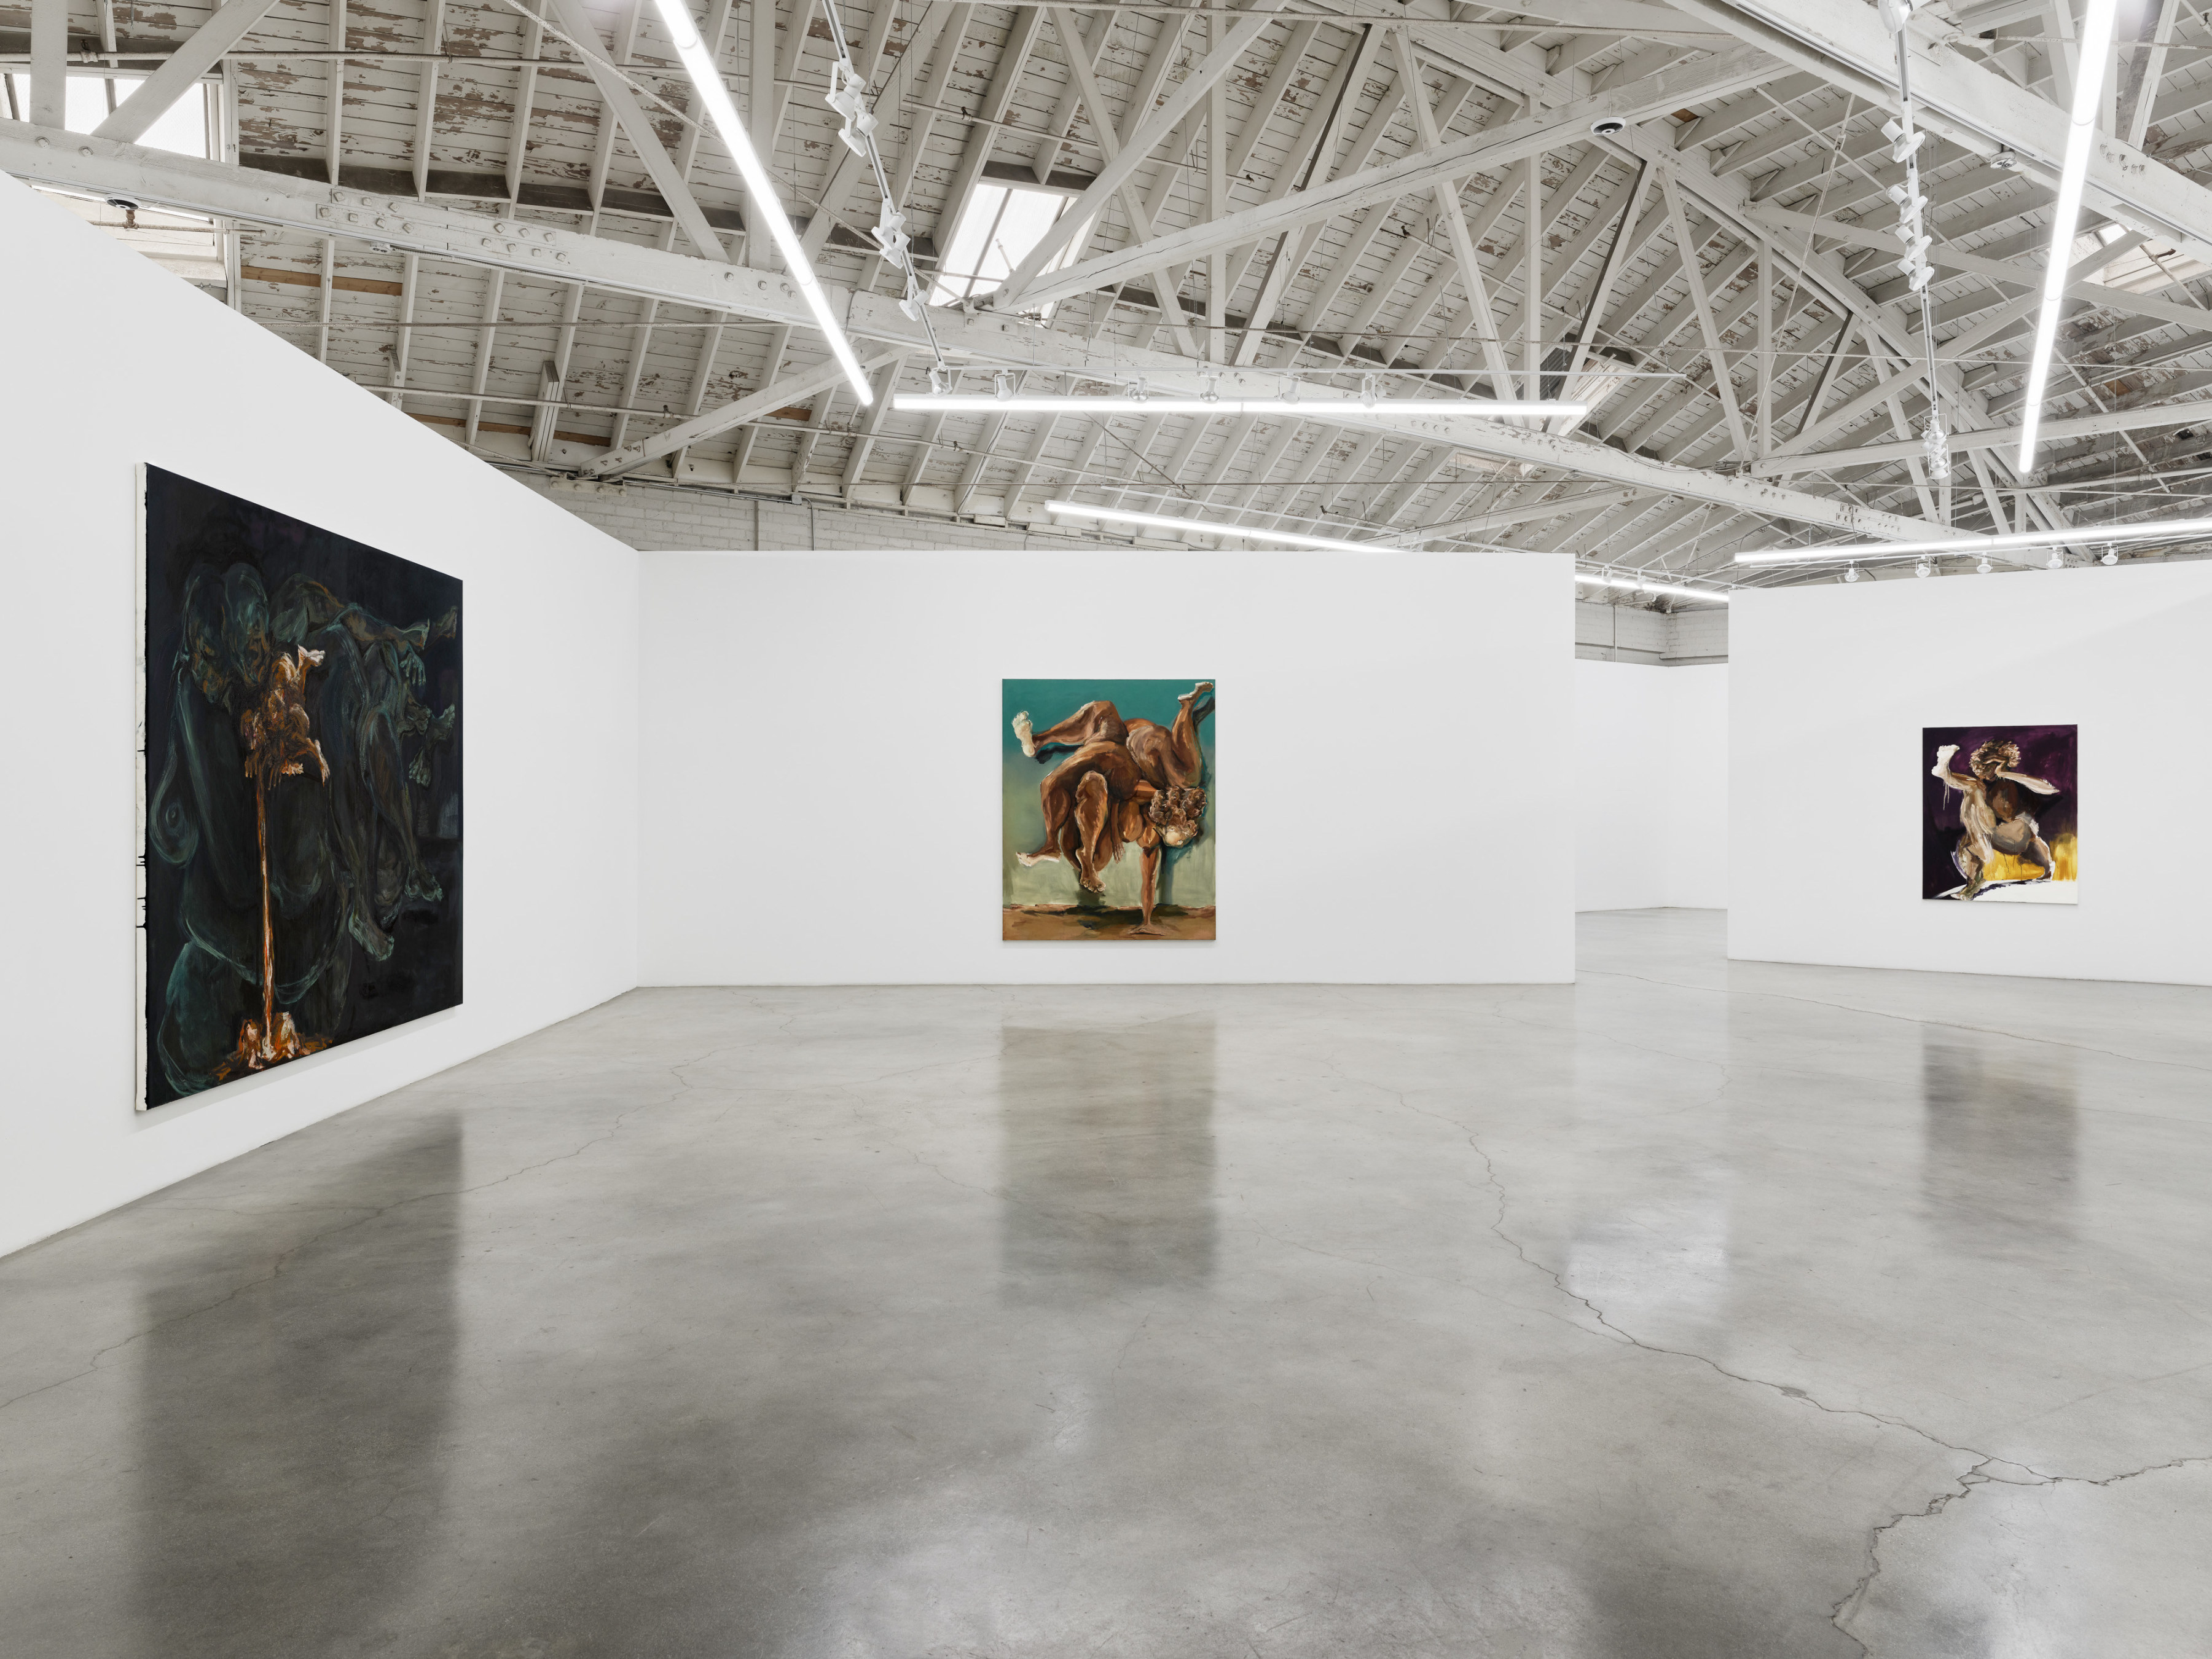 Installation view of Márcia Falcão’s “Flesh Monuments” at Night Gallery 